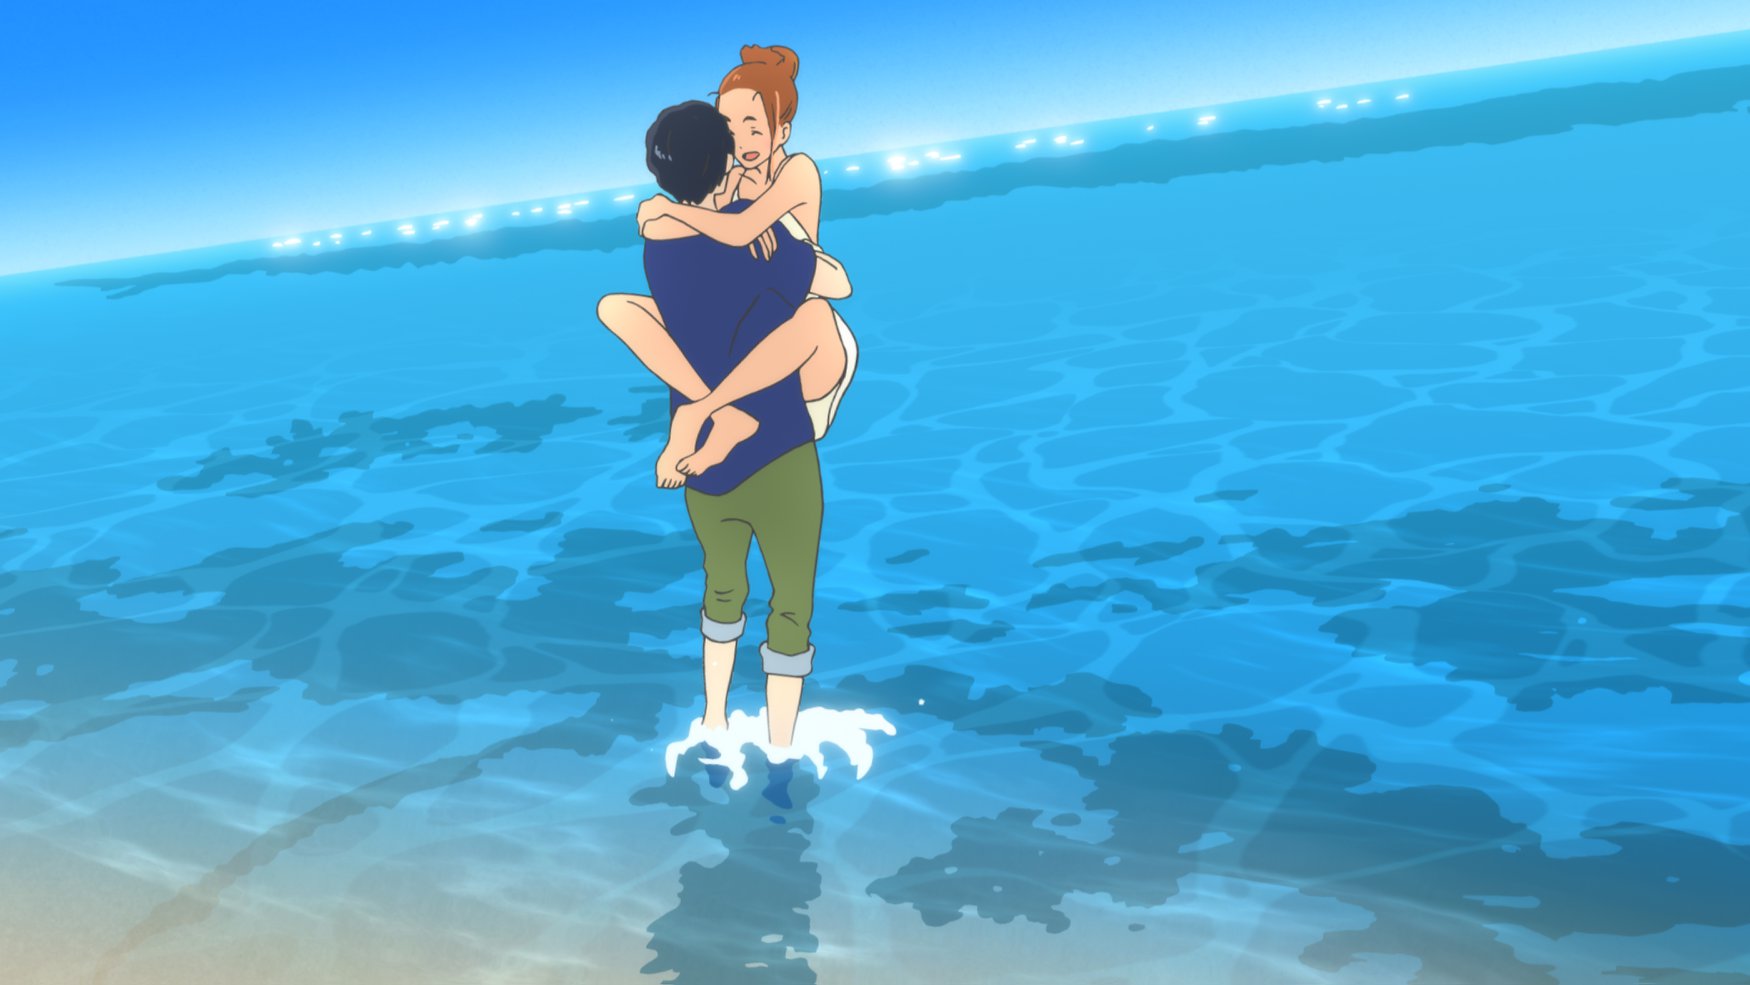 Merit Leighton on Landing Her Dream Job of Voicing Anime in Masaaki Yuasa’s Ride Your Wave [Exclusive Interview]